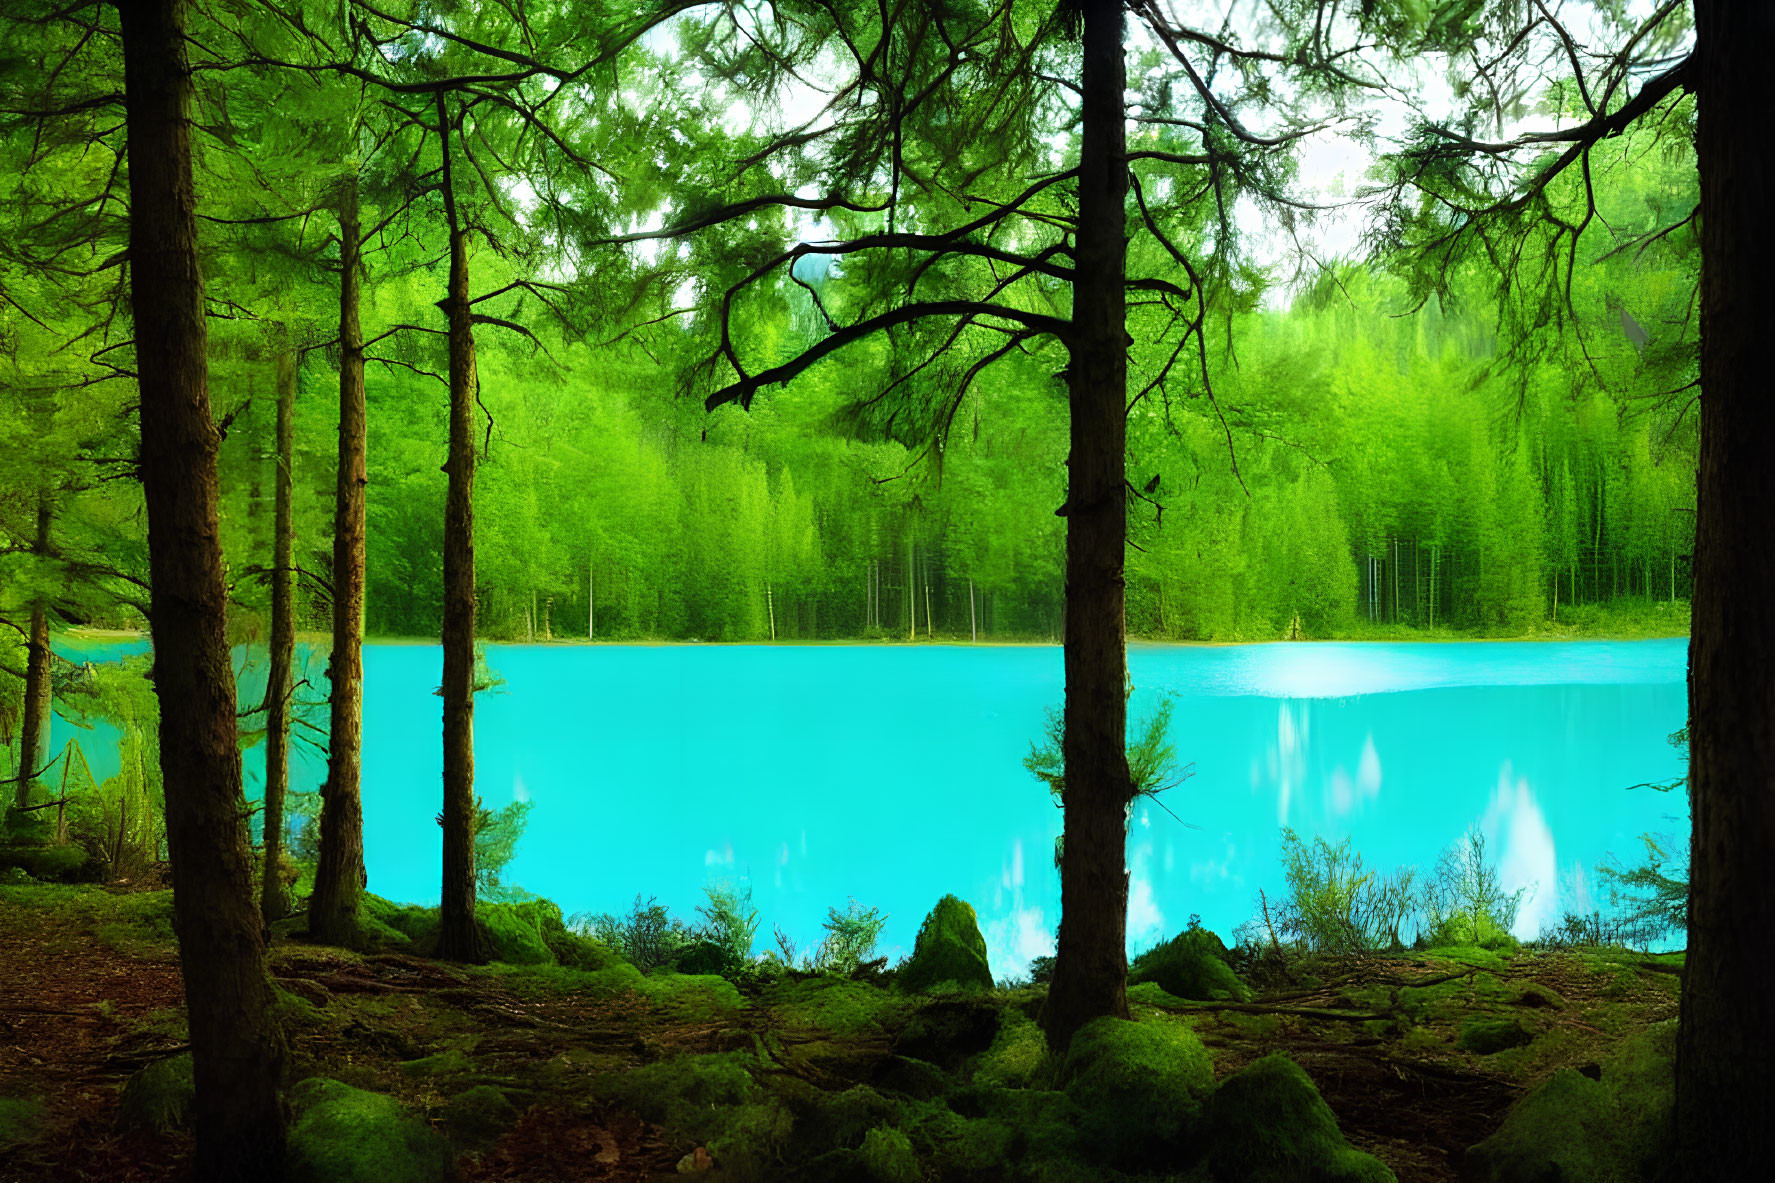 Tranquil Turquoise Lake Amid Lush Green Forest